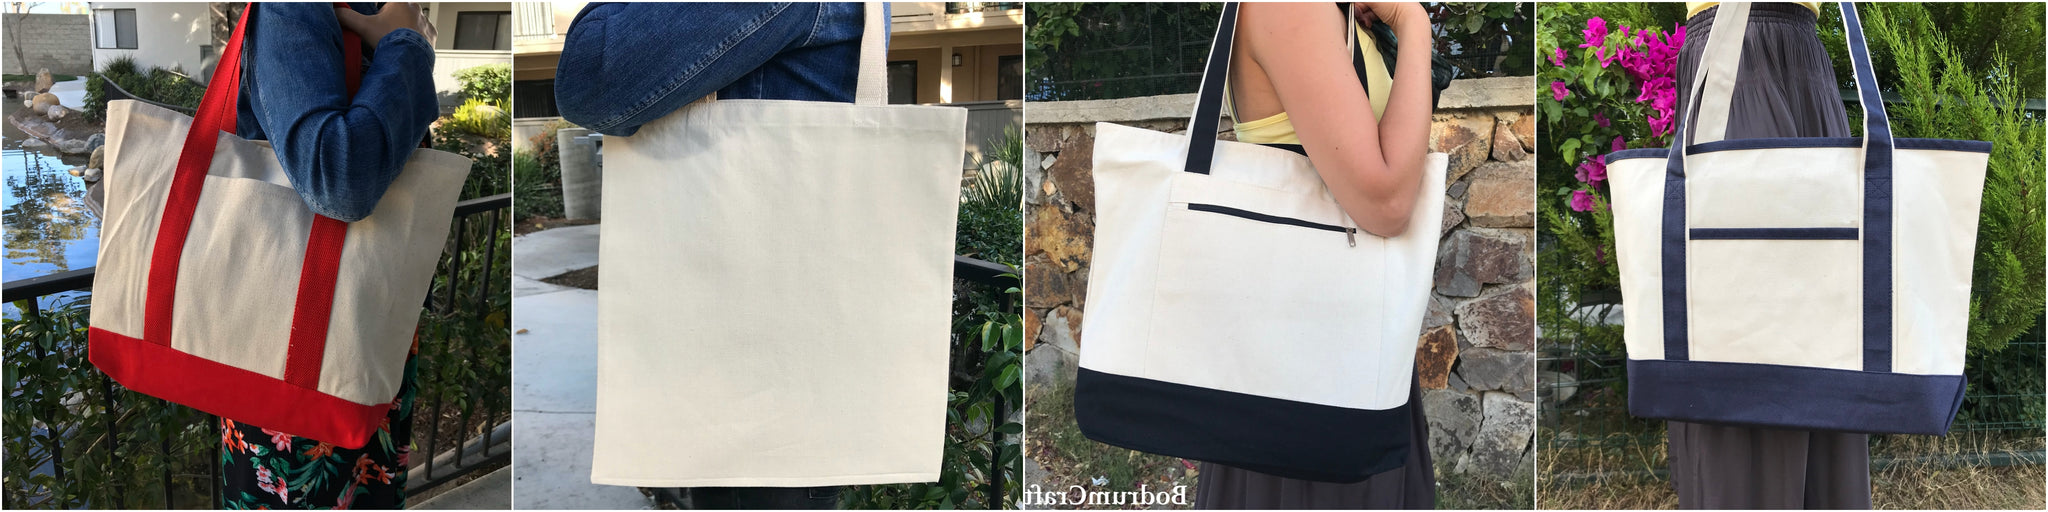 Wholesale Canvas Tote Bags Blank in Bulk